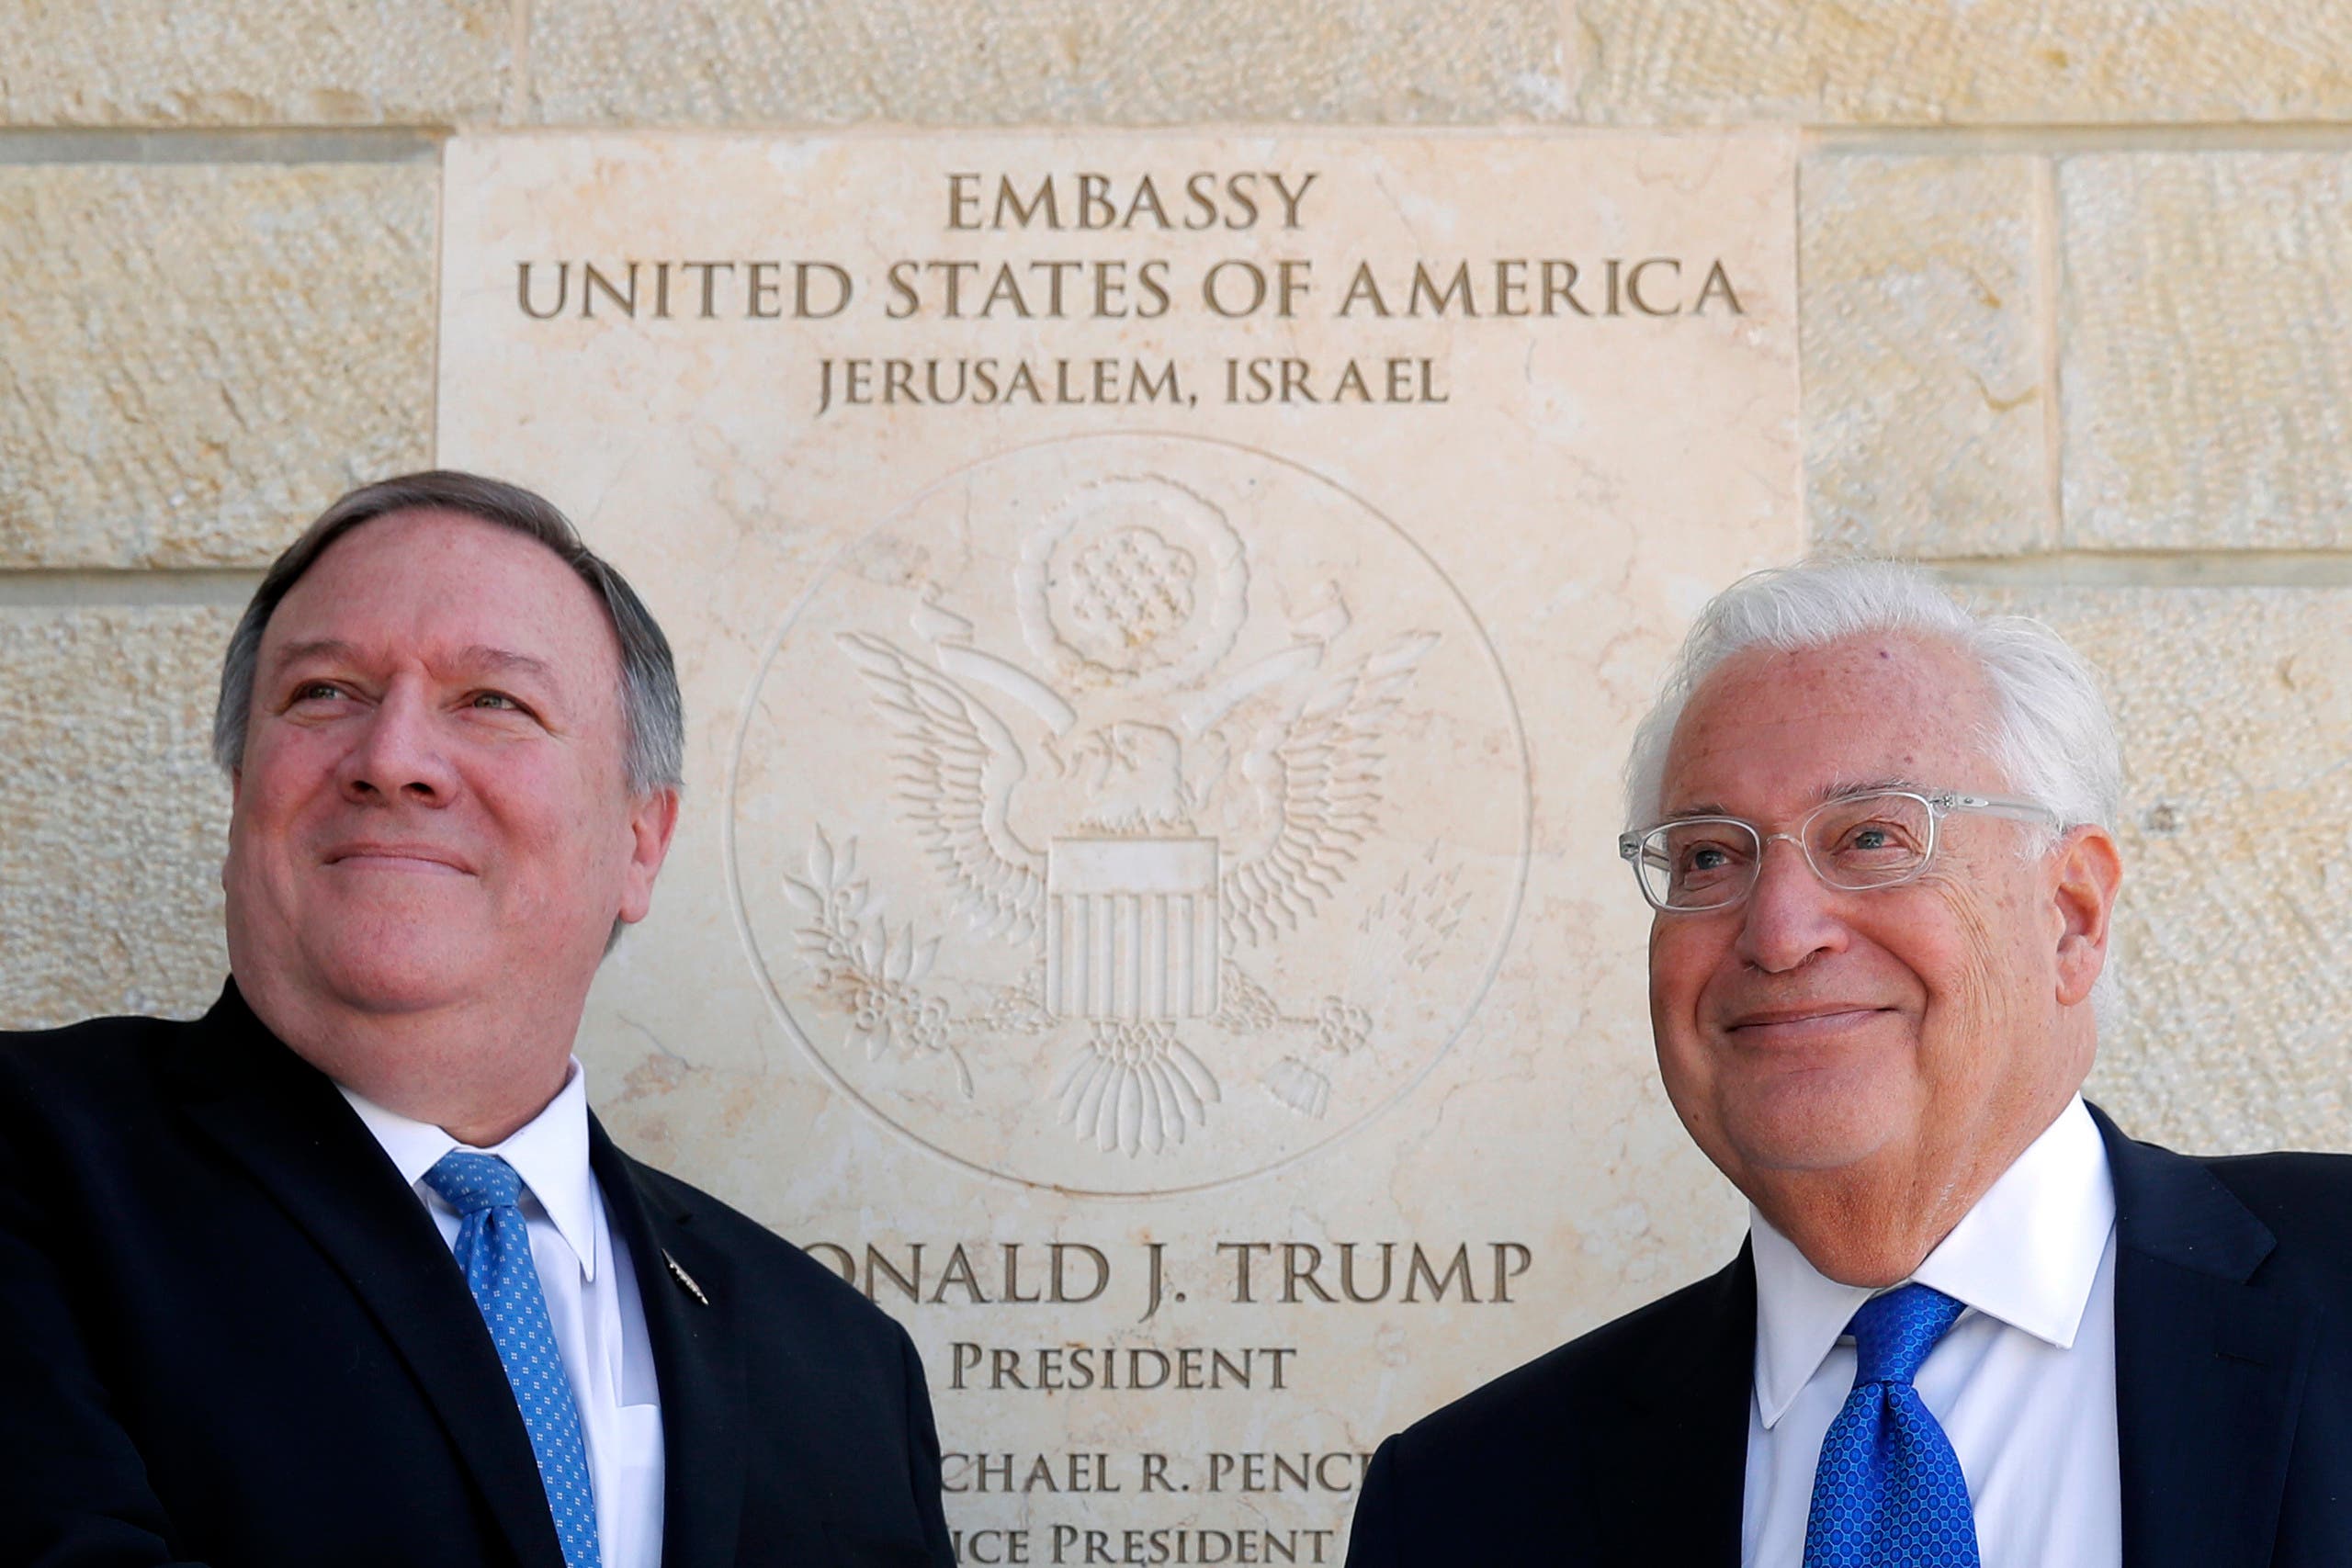 US Secretary of State Mike Pompeo and US Ambassador to Israel David Friedman stand next to the dedication plaque at the US embassy in Jerusalem on March 21, 2019. (AP)